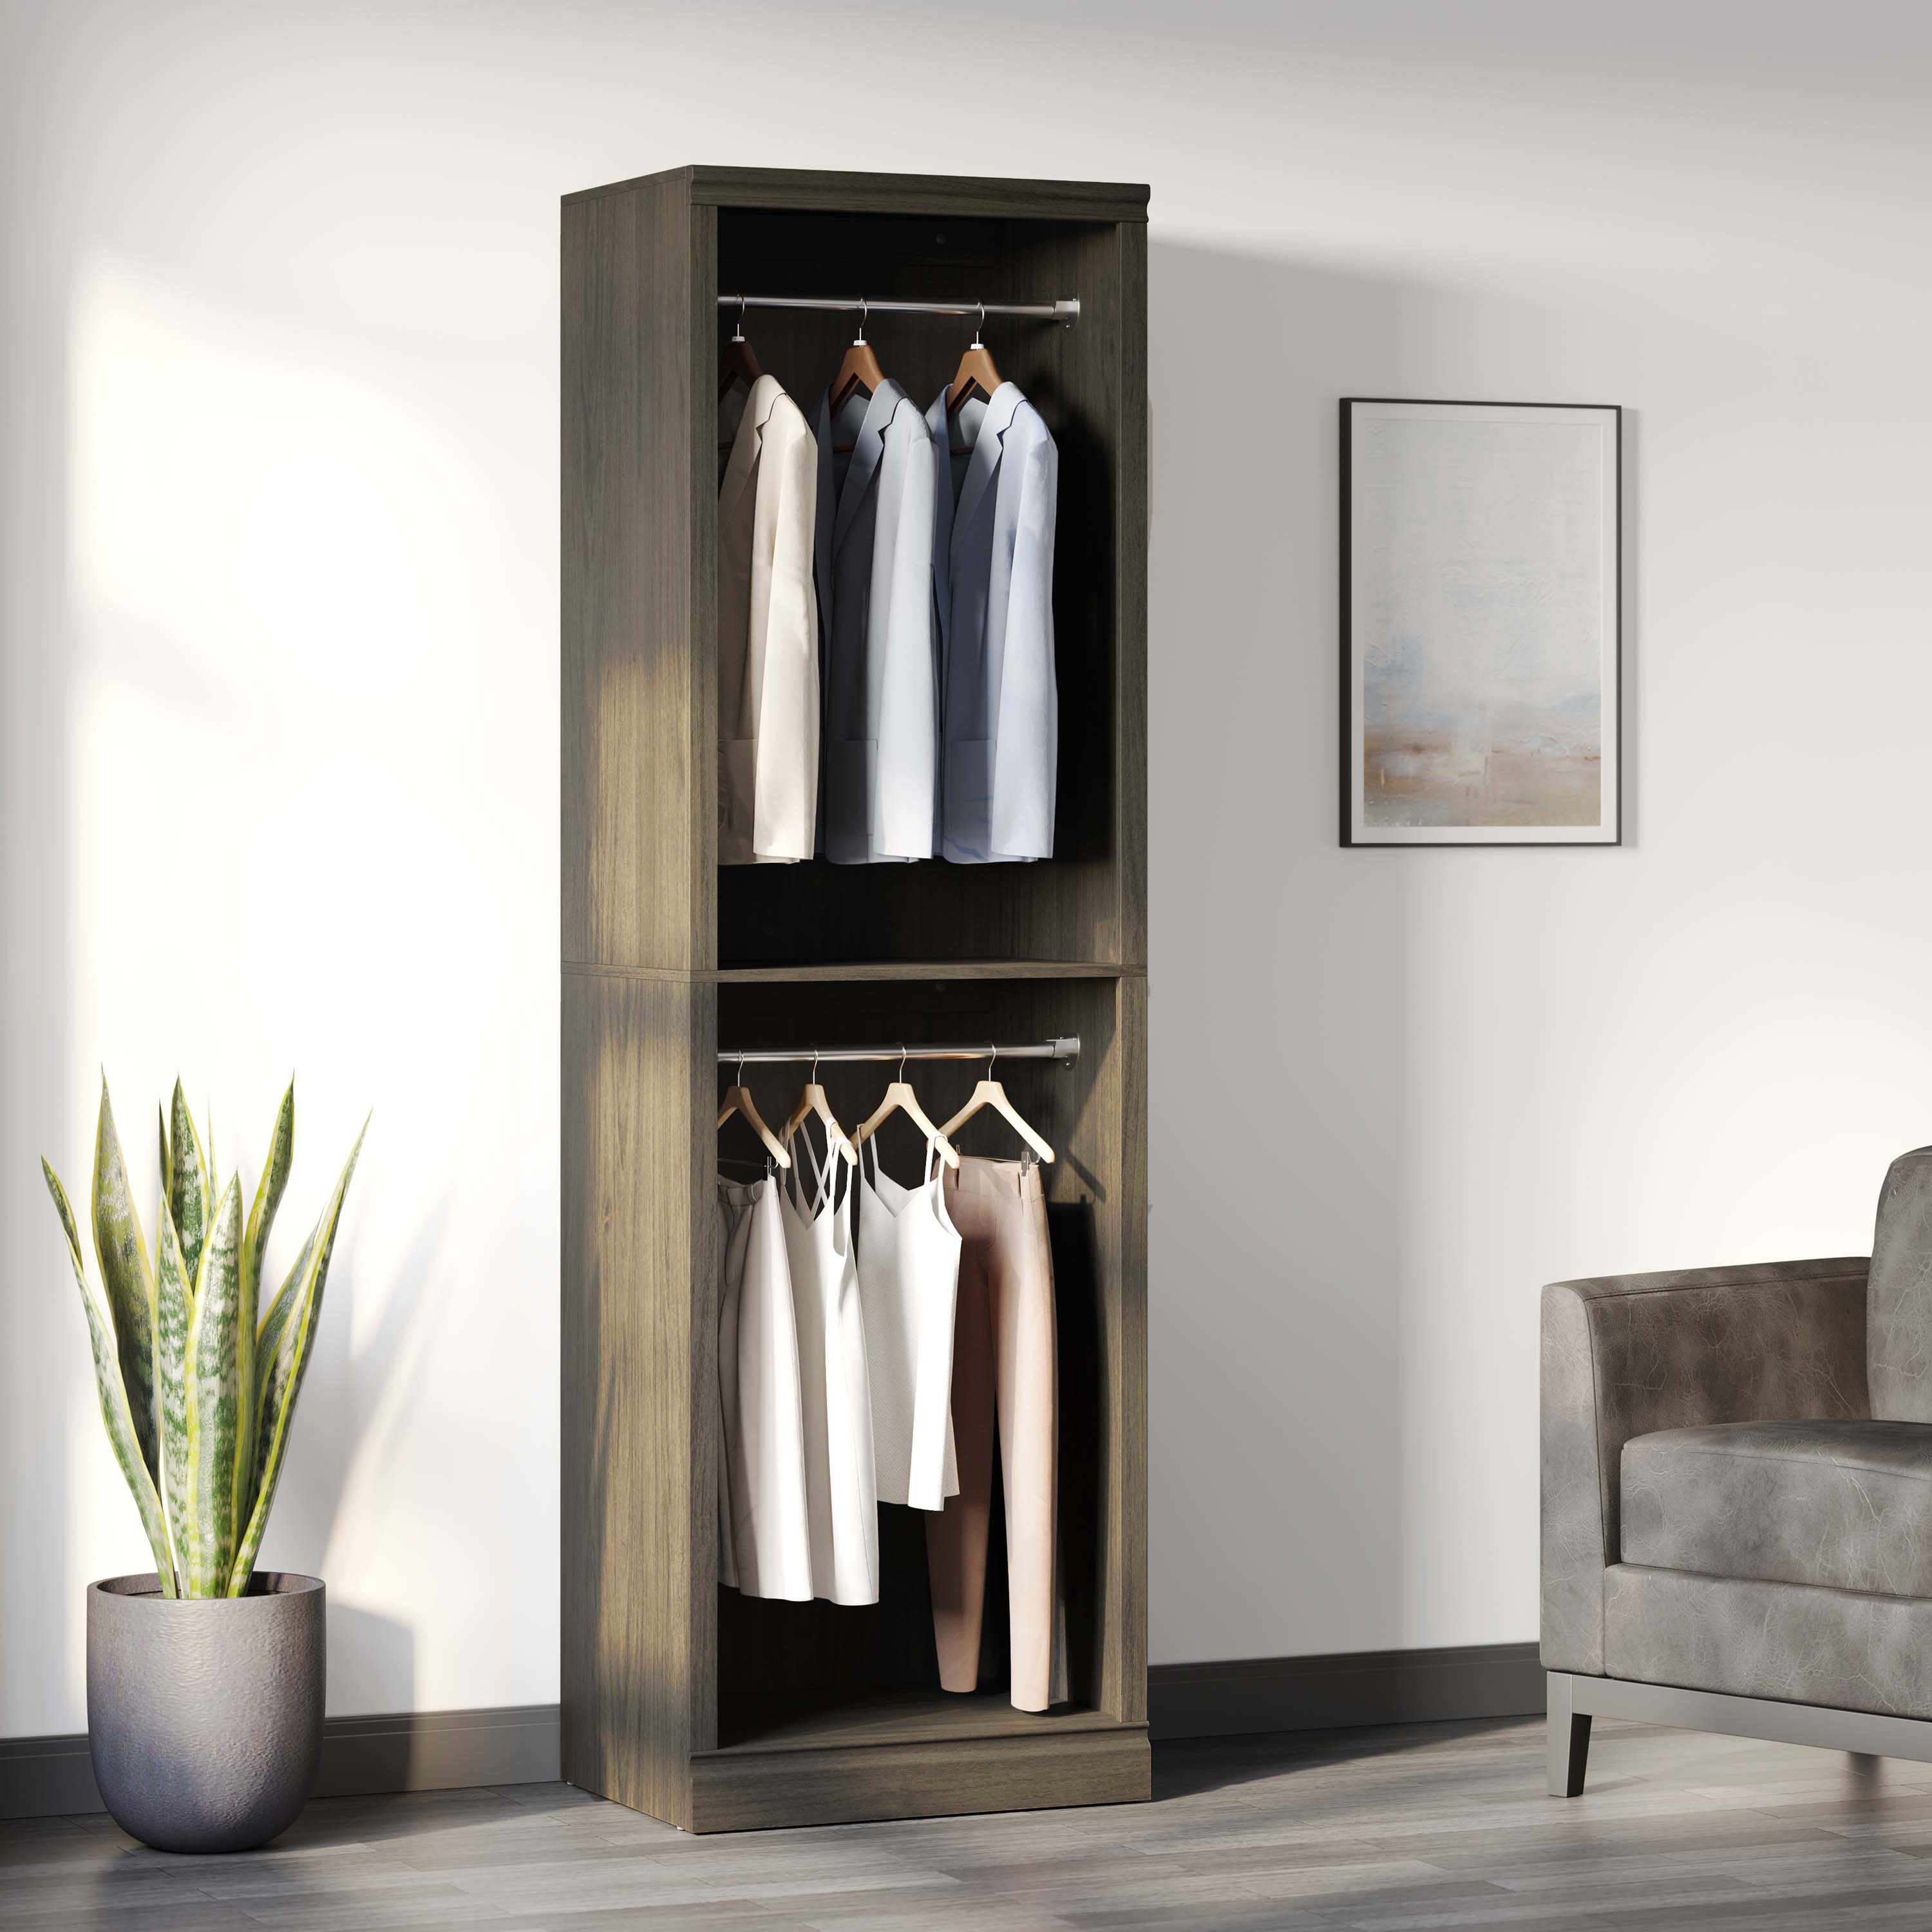 Scott Living Nolan 25" Wardrobe Closet With 2 Shelves And 2 Clothes Rod  Closet System & Reviews | Wayfair Throughout 2 Separable Wardrobes (Gallery 4 of 20)